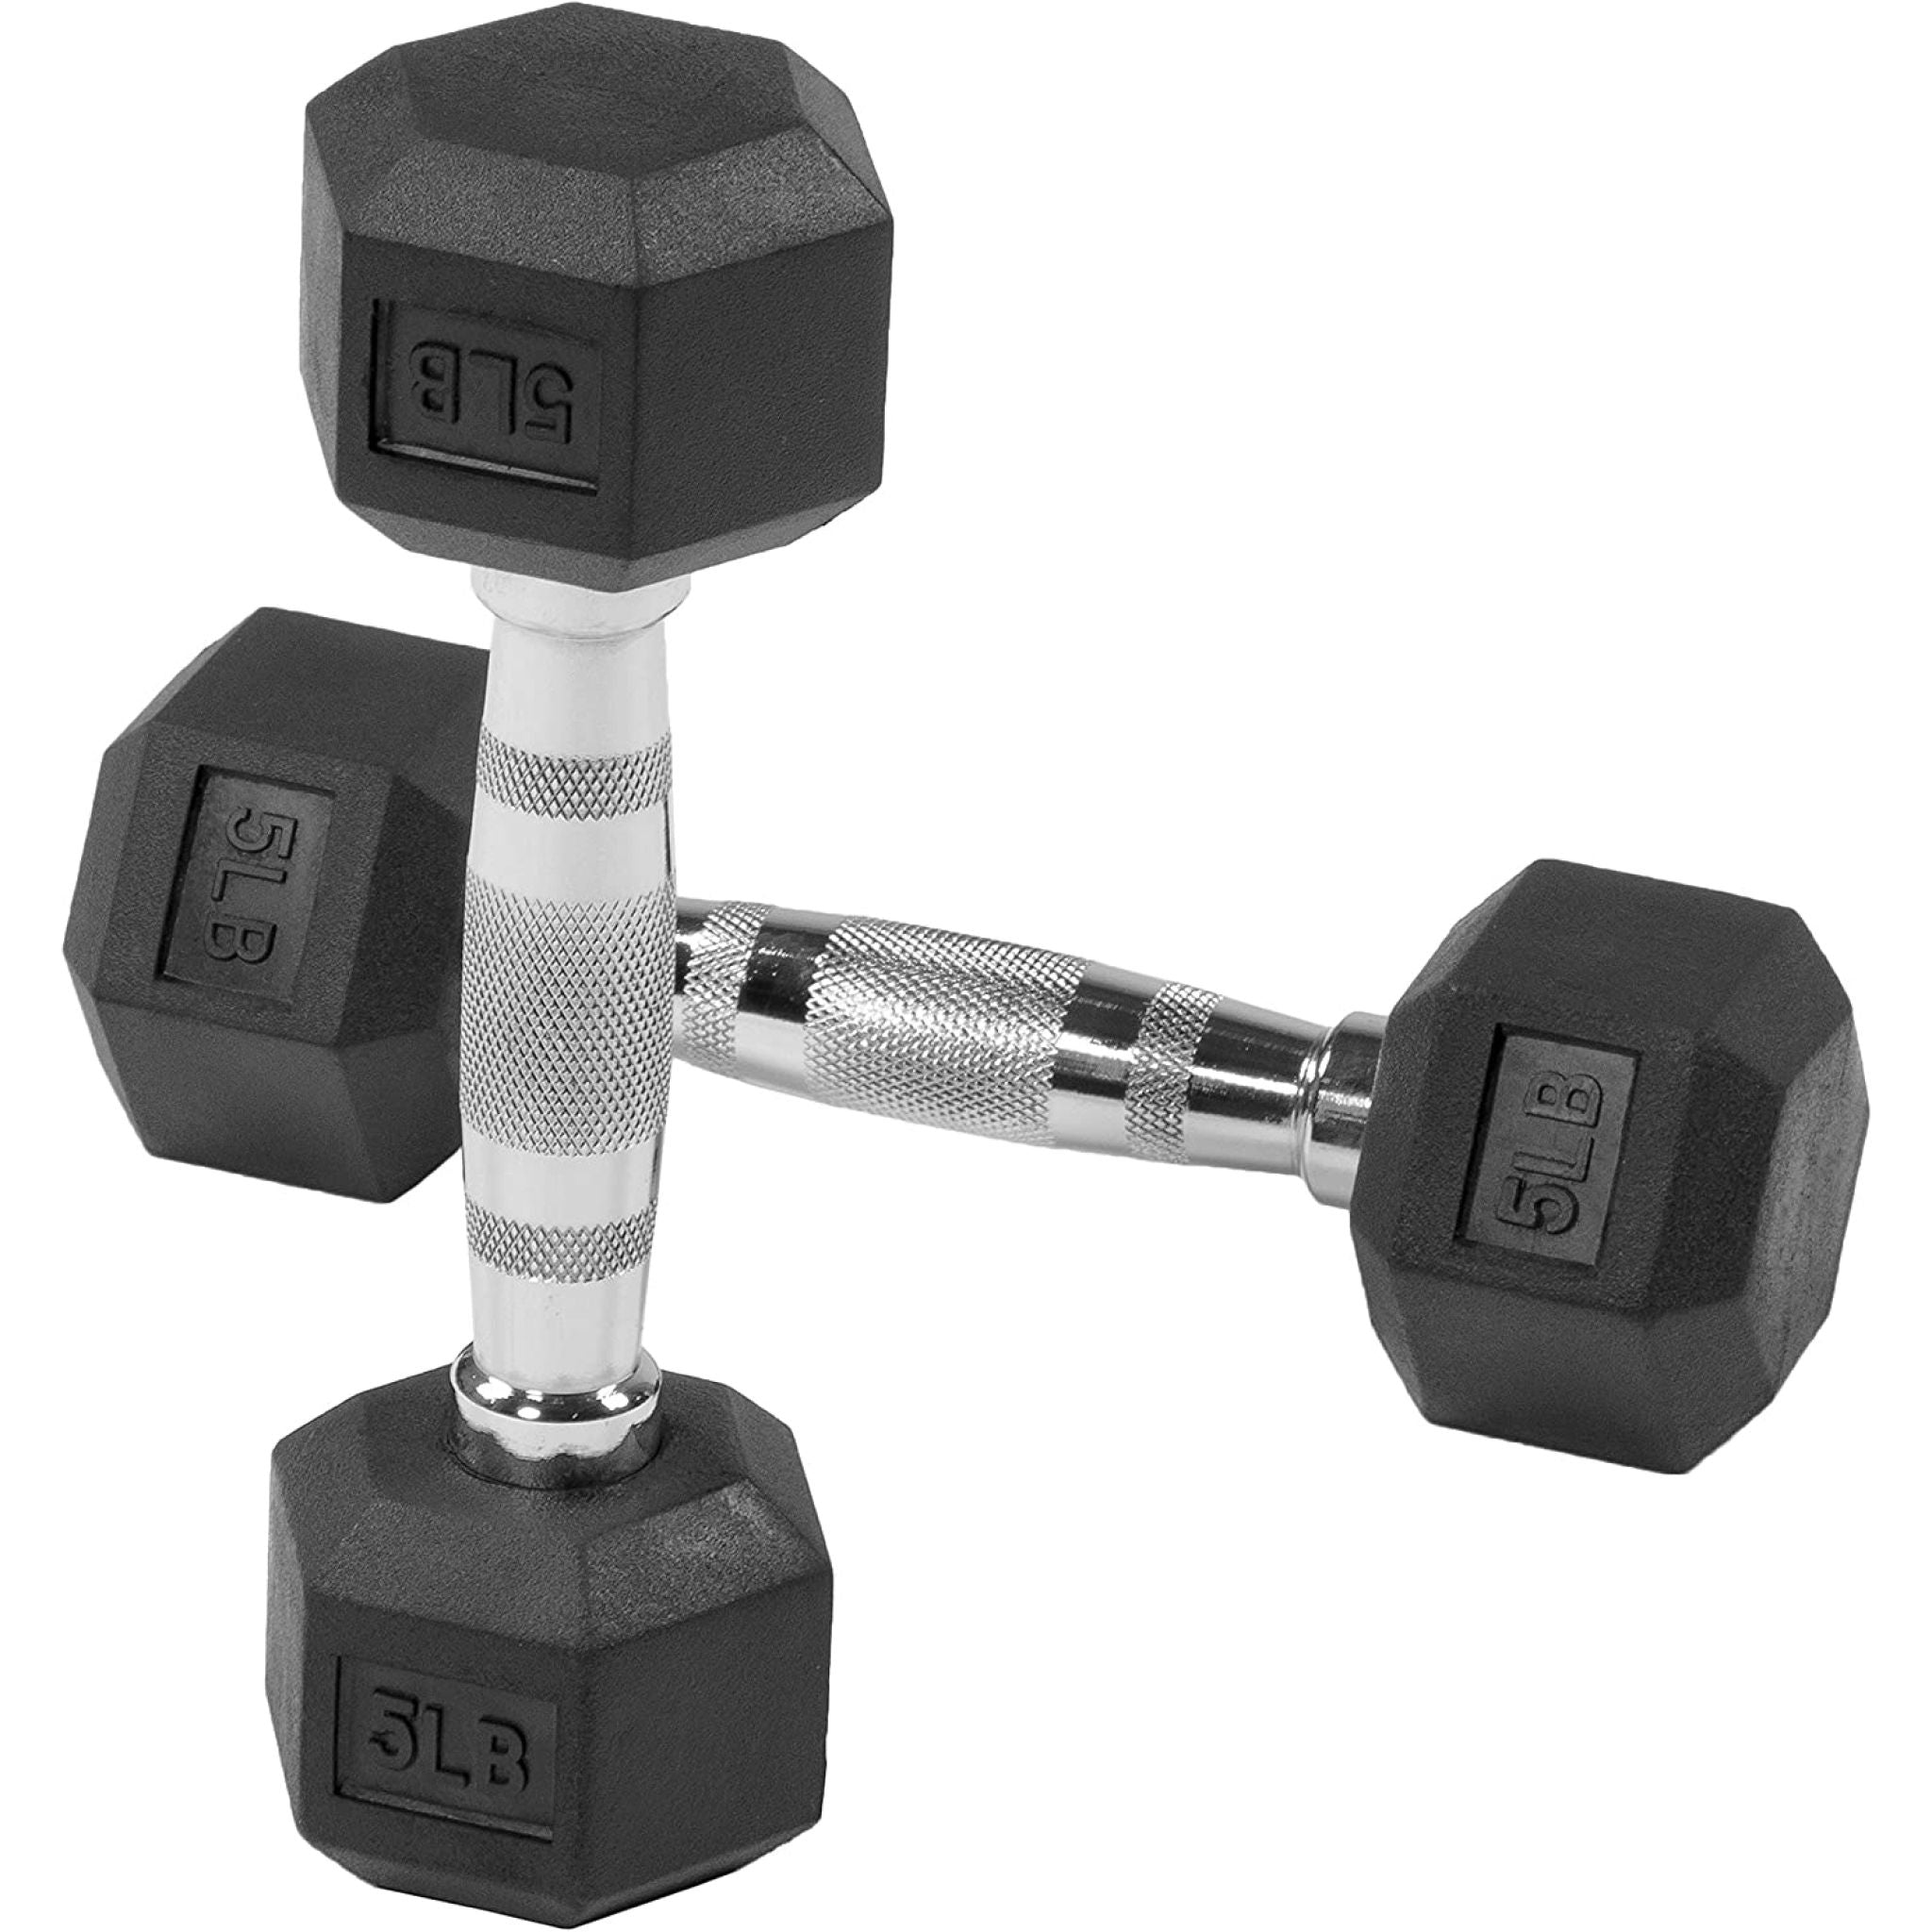 5Lb rubber hex dumbbells pair, one upright, at Express Gym Supply